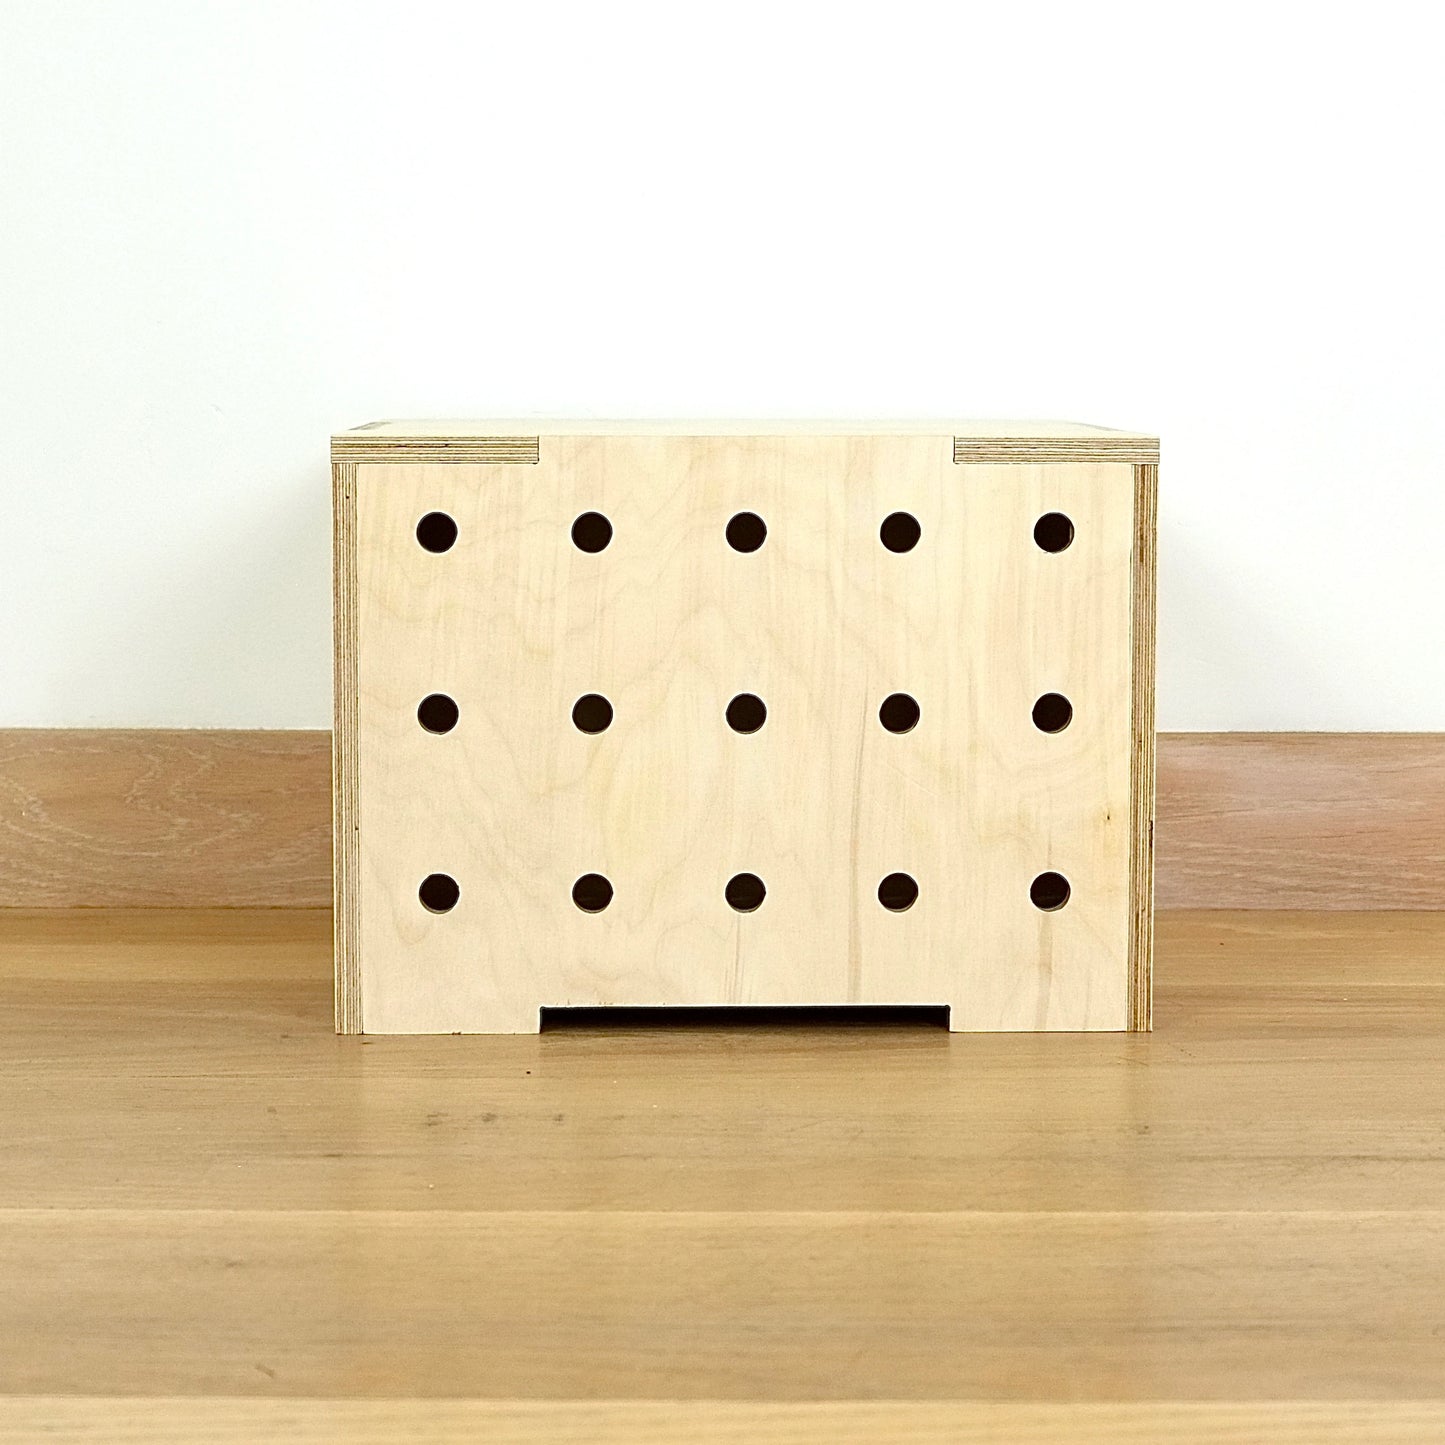 A simple pale wooden square shaped storage crate facing front on, with three rows of holes cut in the front facet and a wooden lid, sitting on a wooden floor